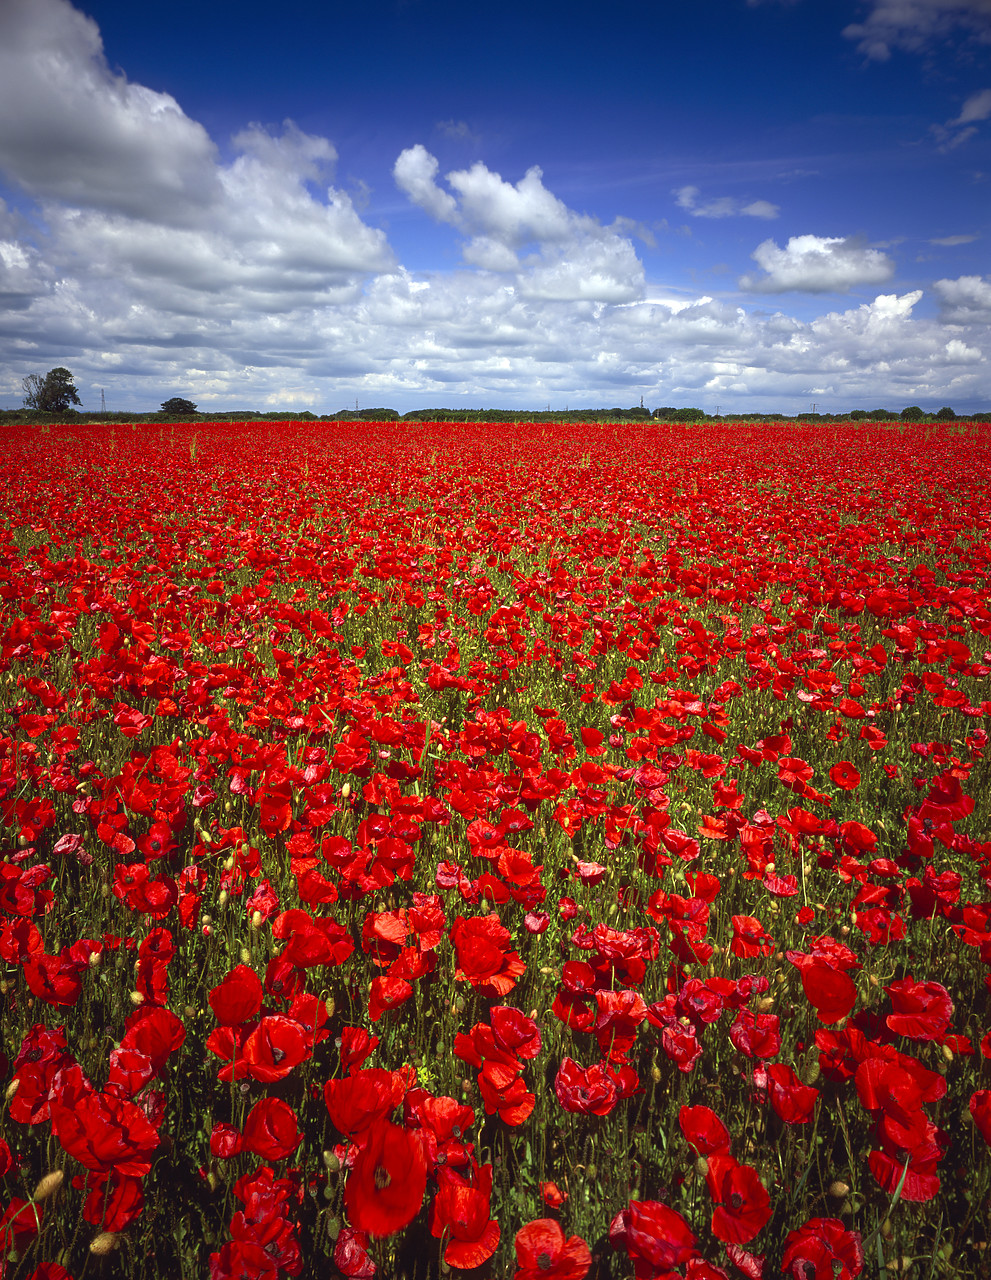 #966116-8 - Field of Poppies, North Yorkshire, England